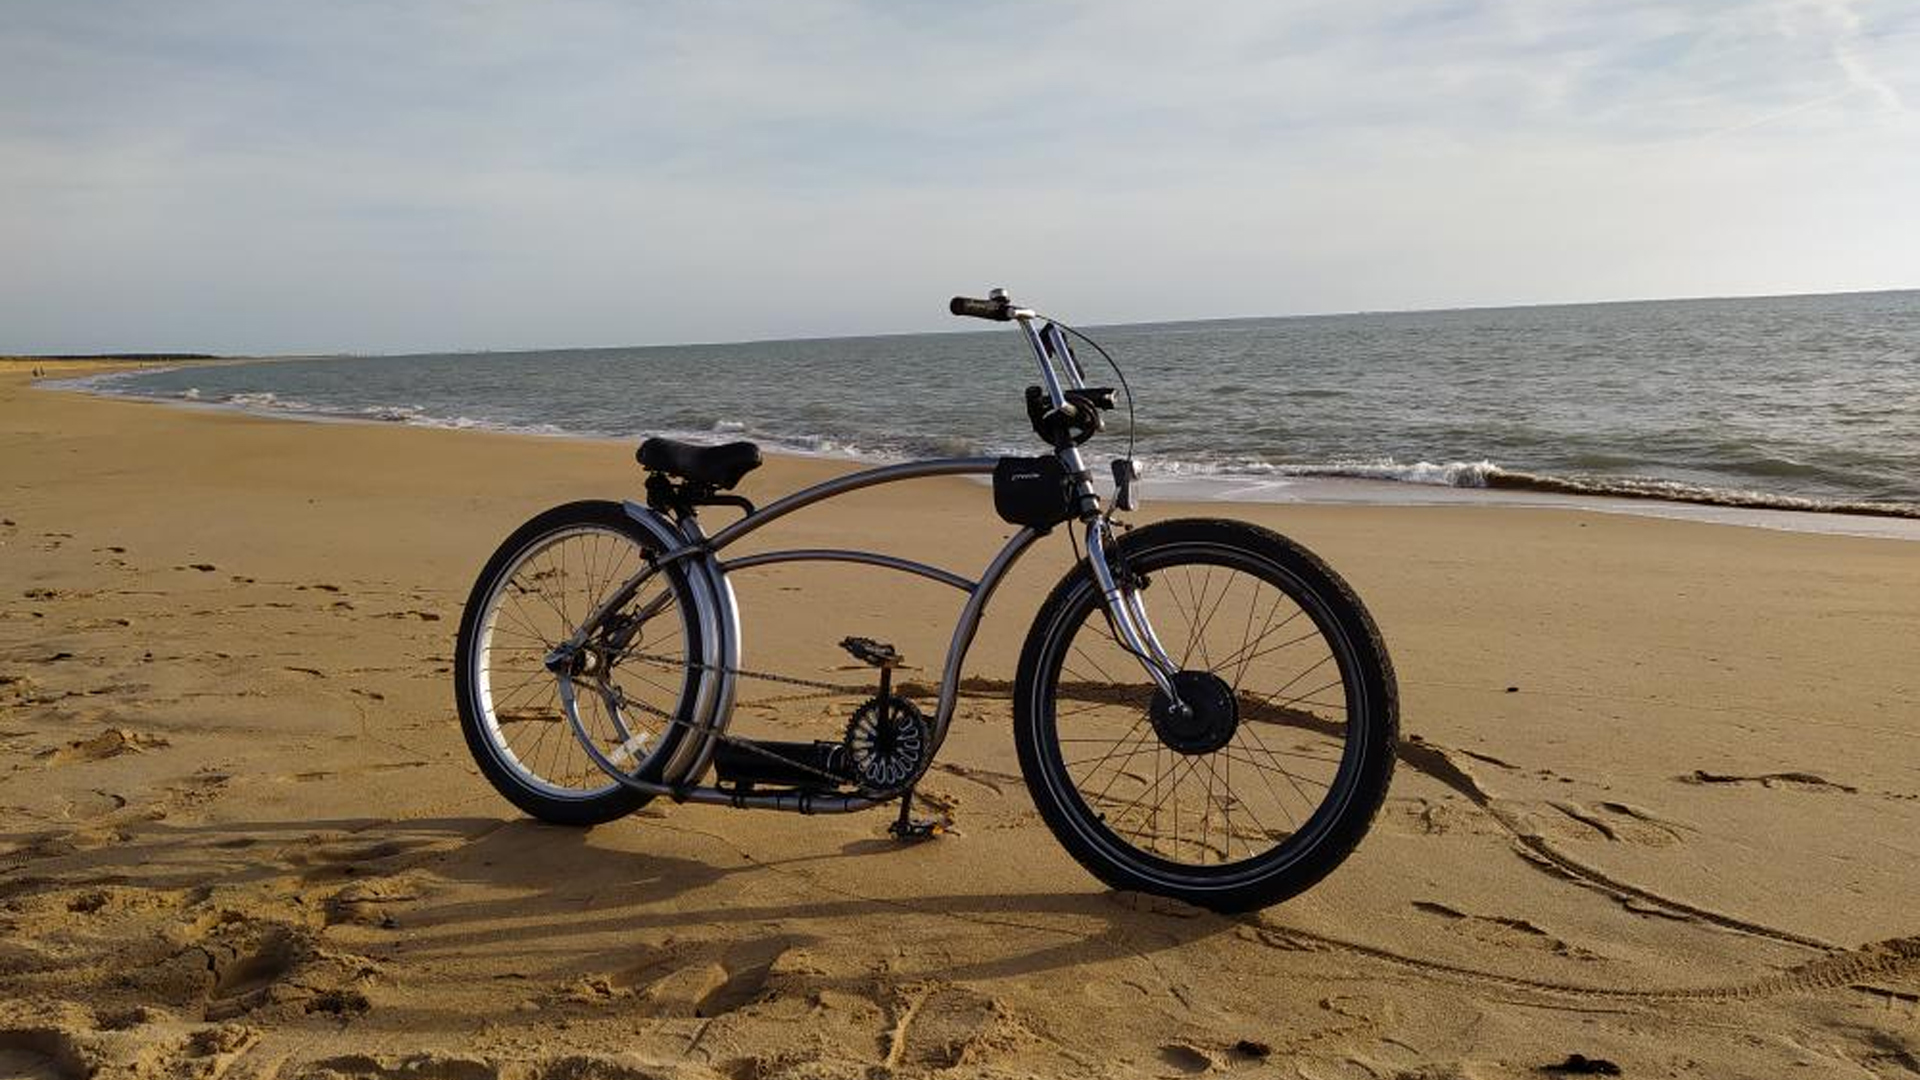 How to turn your old bike into an electric bike scientifically?